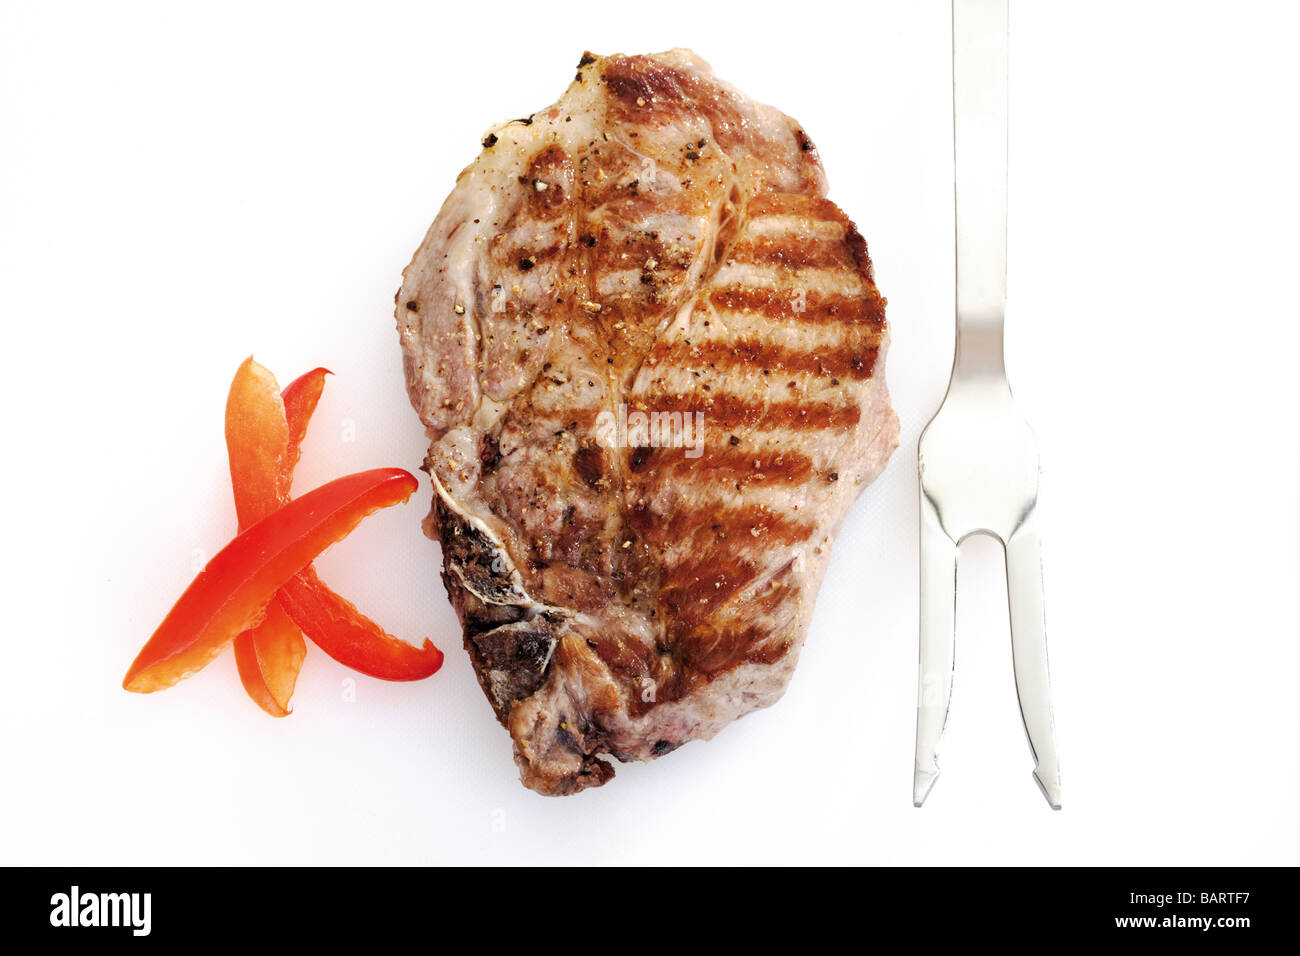 Grilled Pork chop and meat fork, elevated view Stock Photo